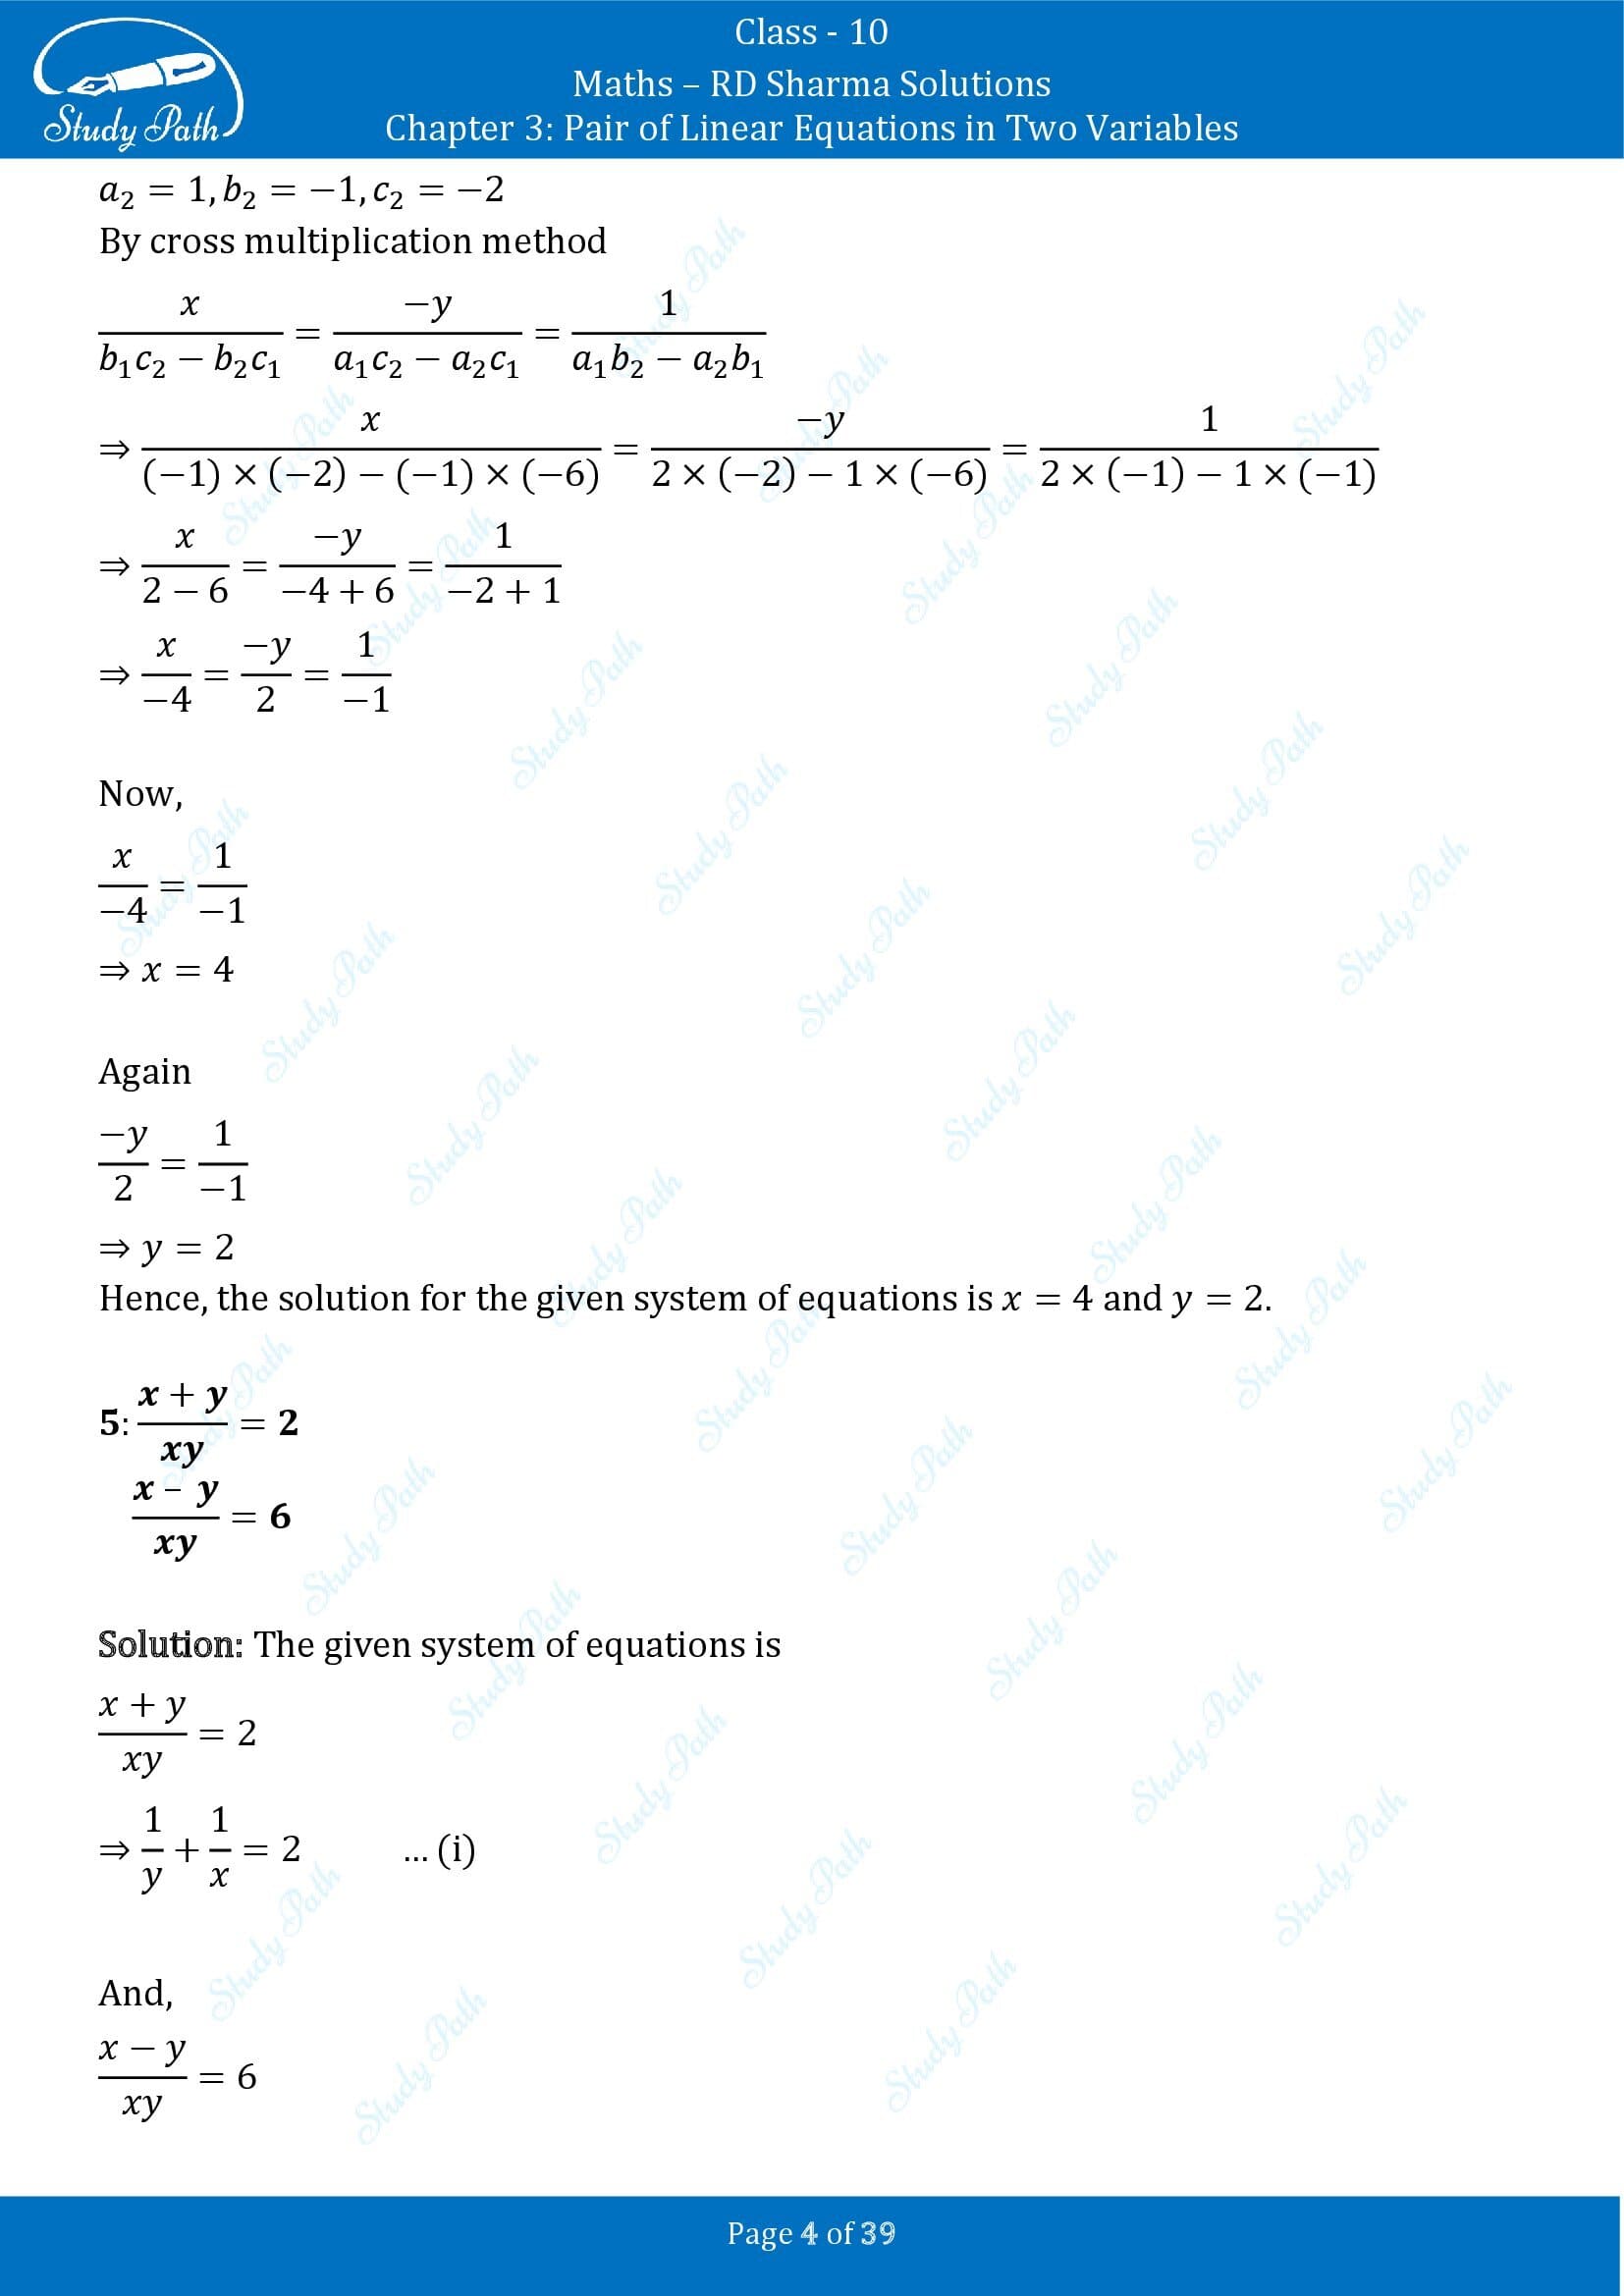 RD Sharma Solutions Class 10 Chapter 3 Pair of Linear Equations in Two Variables Exercise 3.4 00004